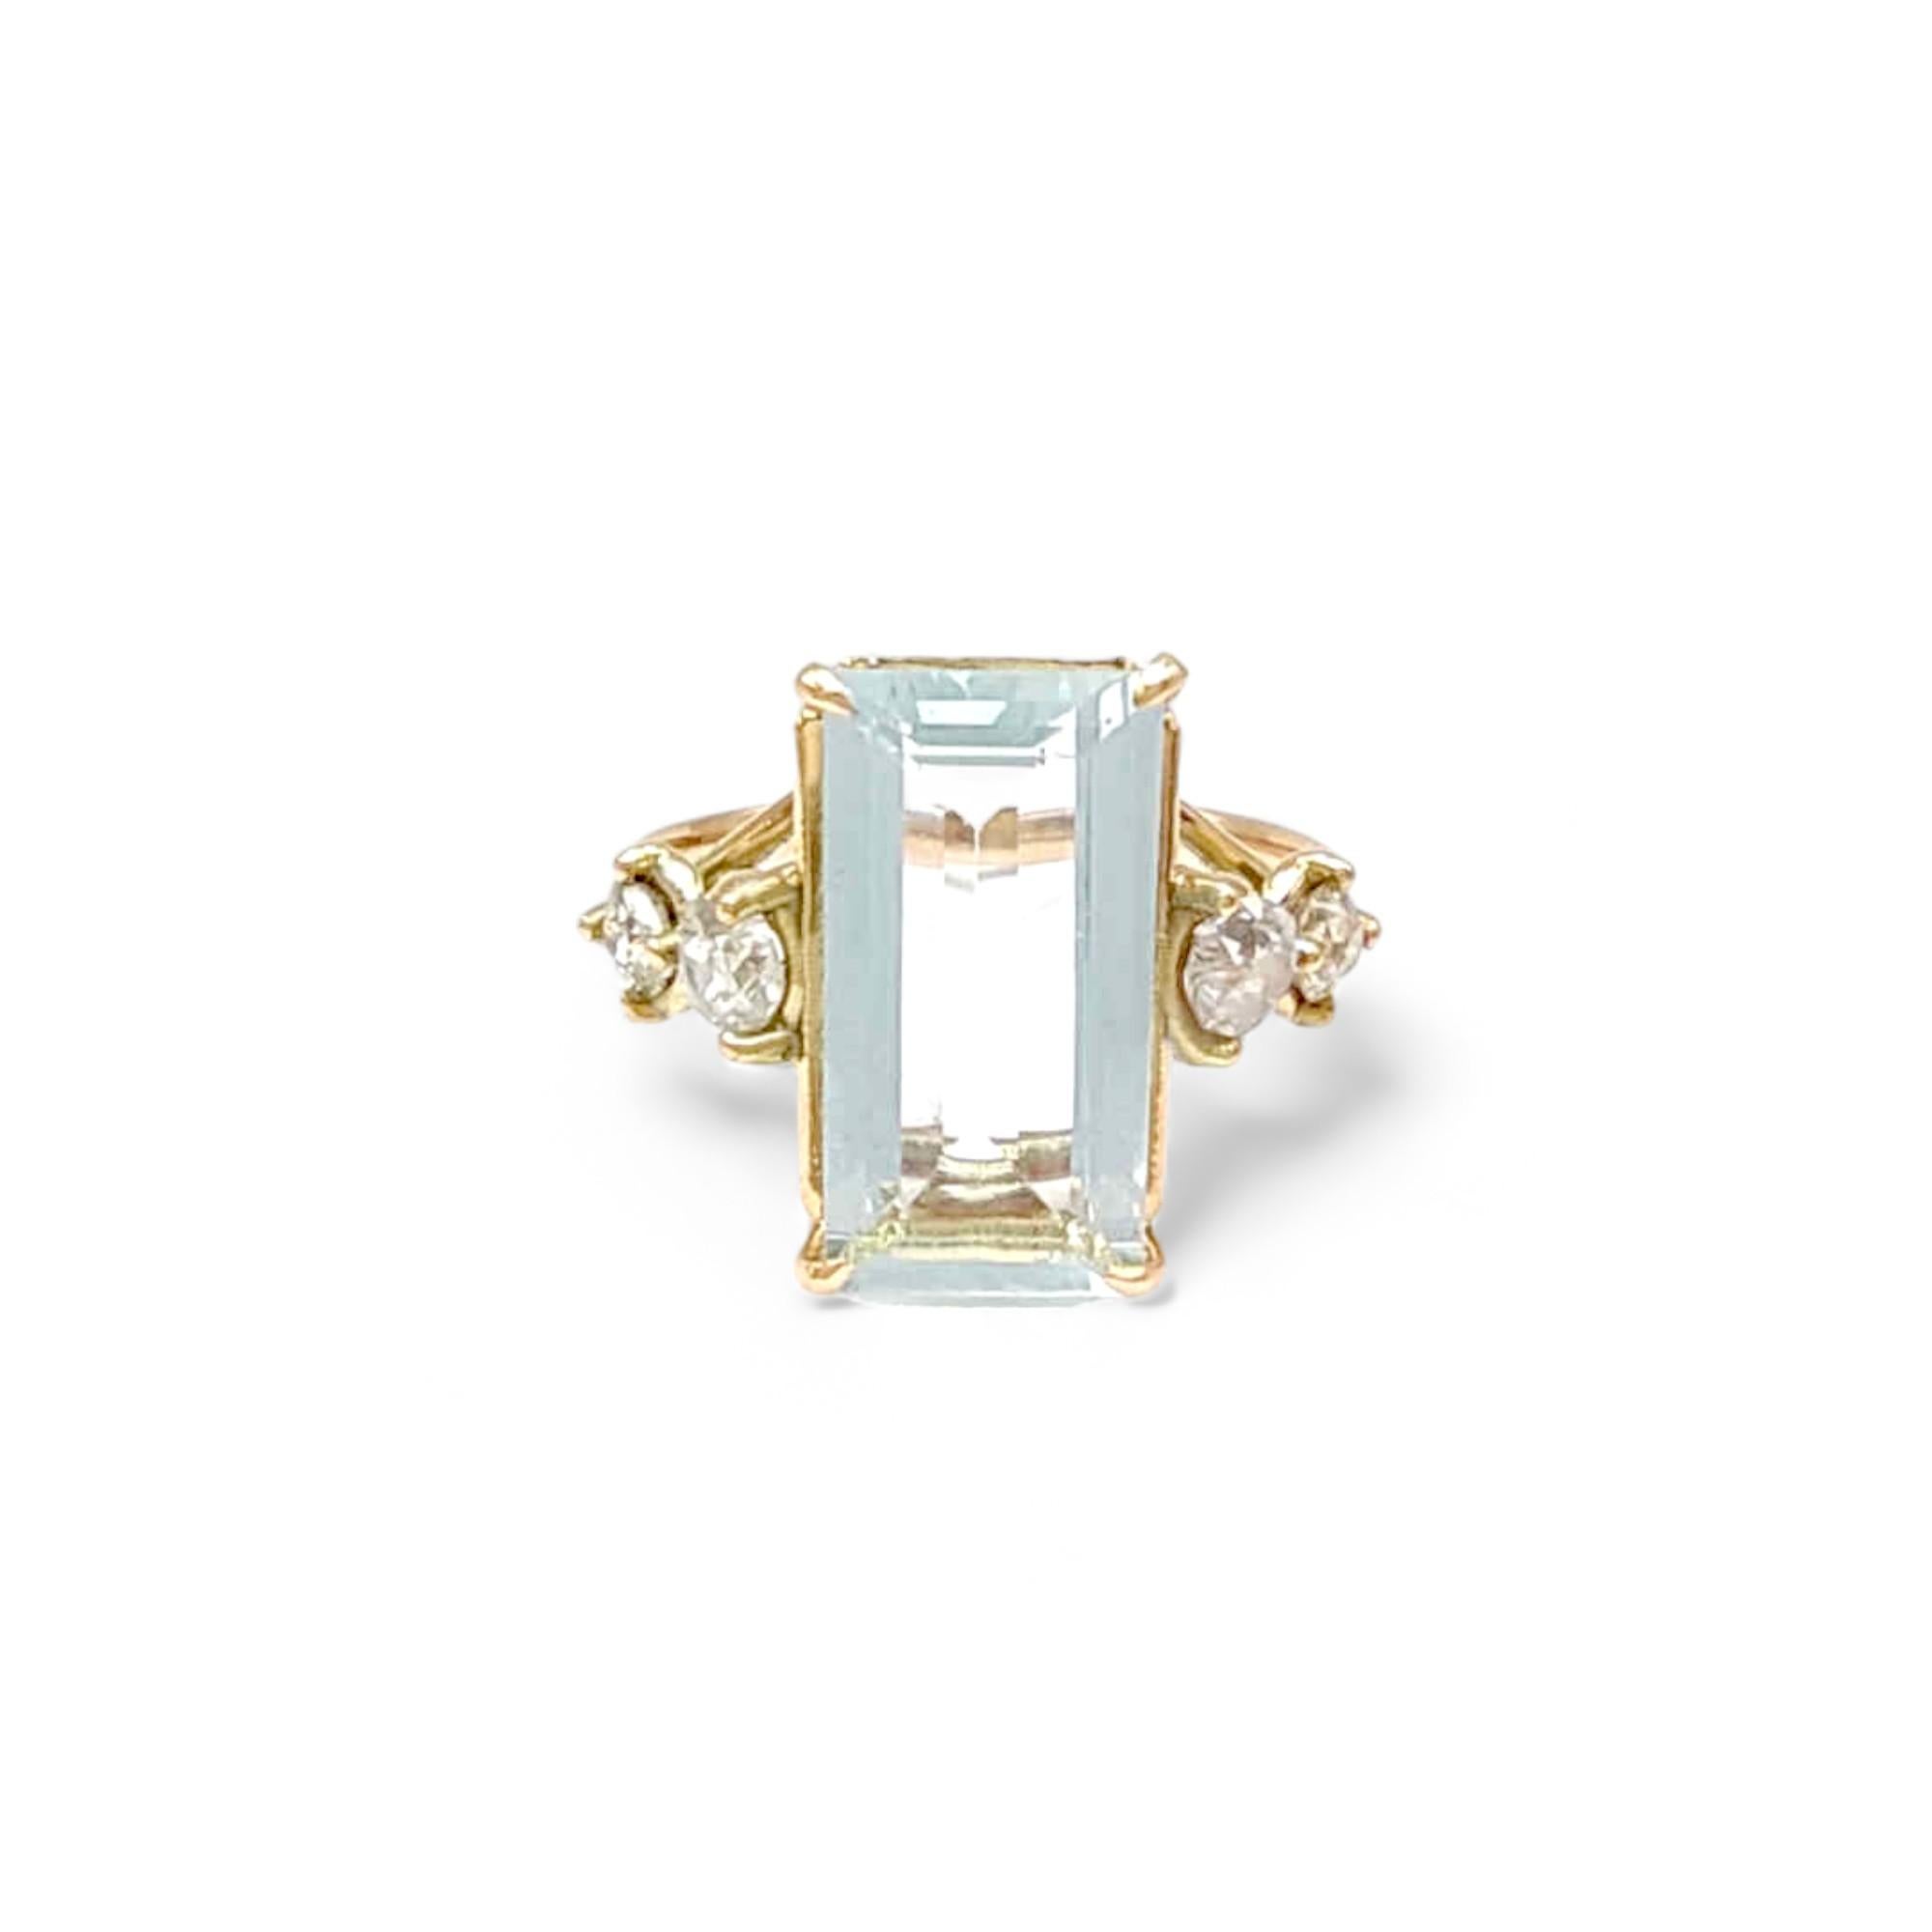 Certified 2.30 carats Aquamarine Engagement Ring - 14k Gold with Diamonds For Sale 1